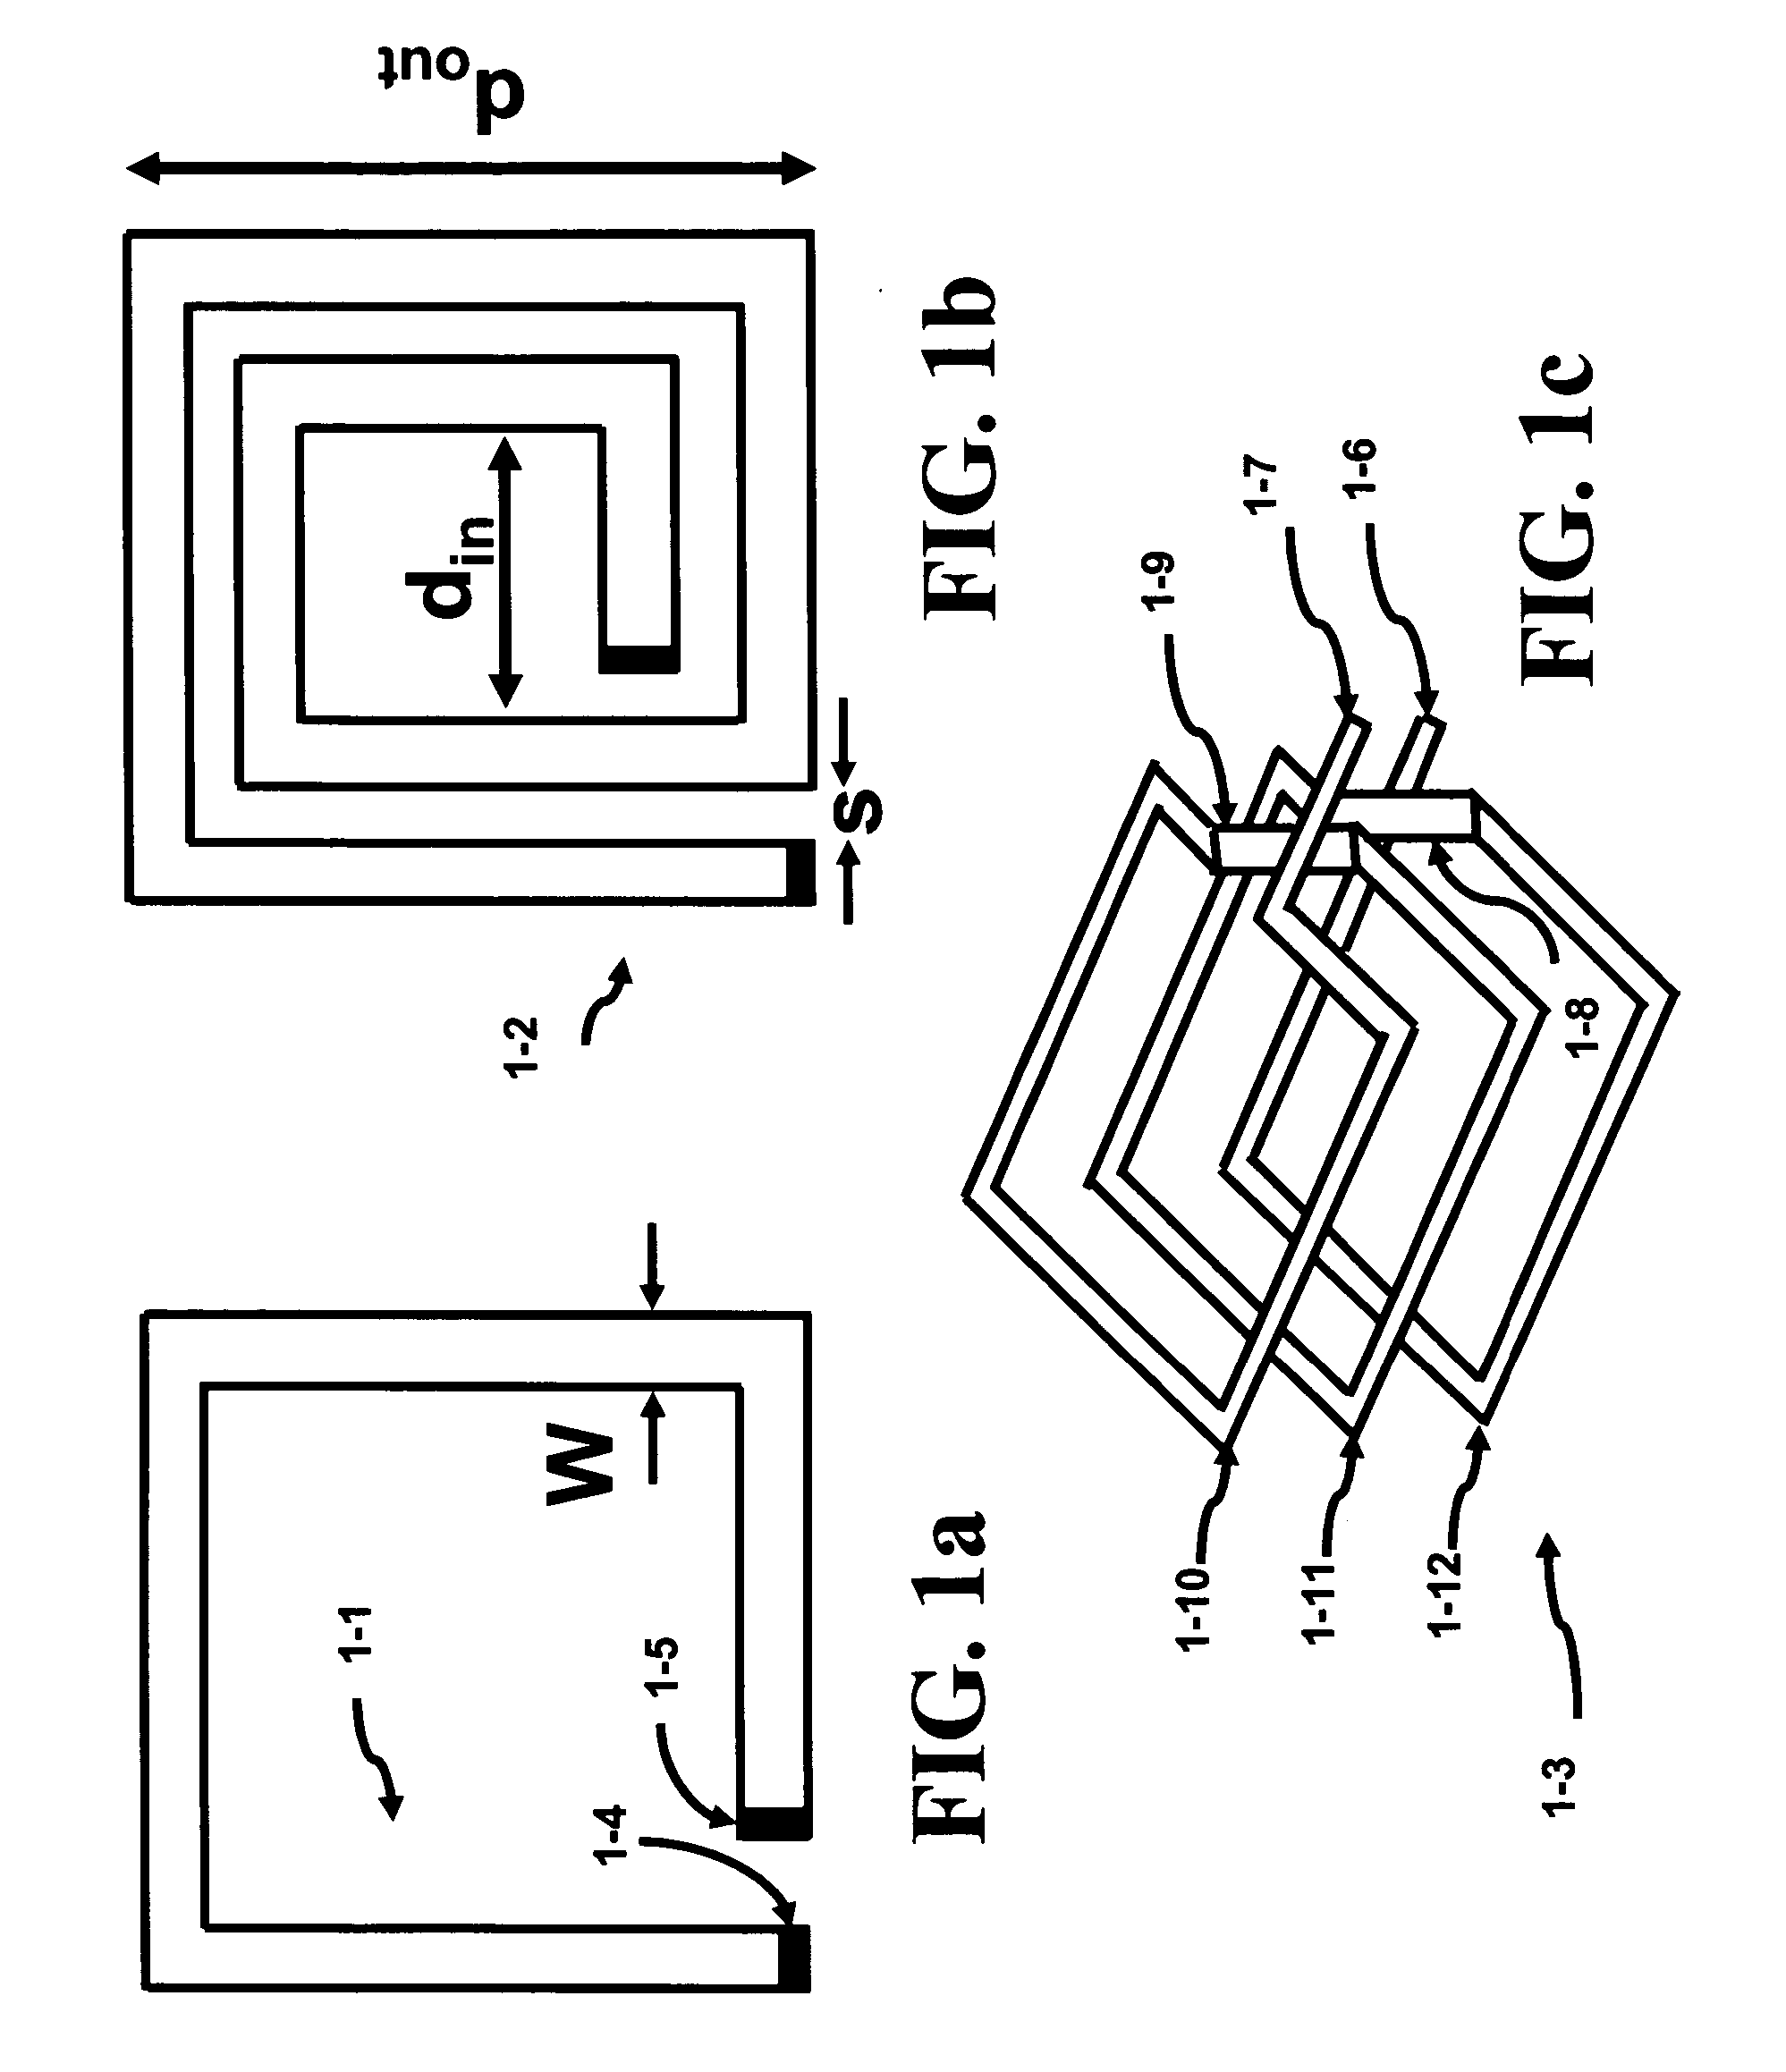 Frequency adjustment techniques in coupled LC tank circuits